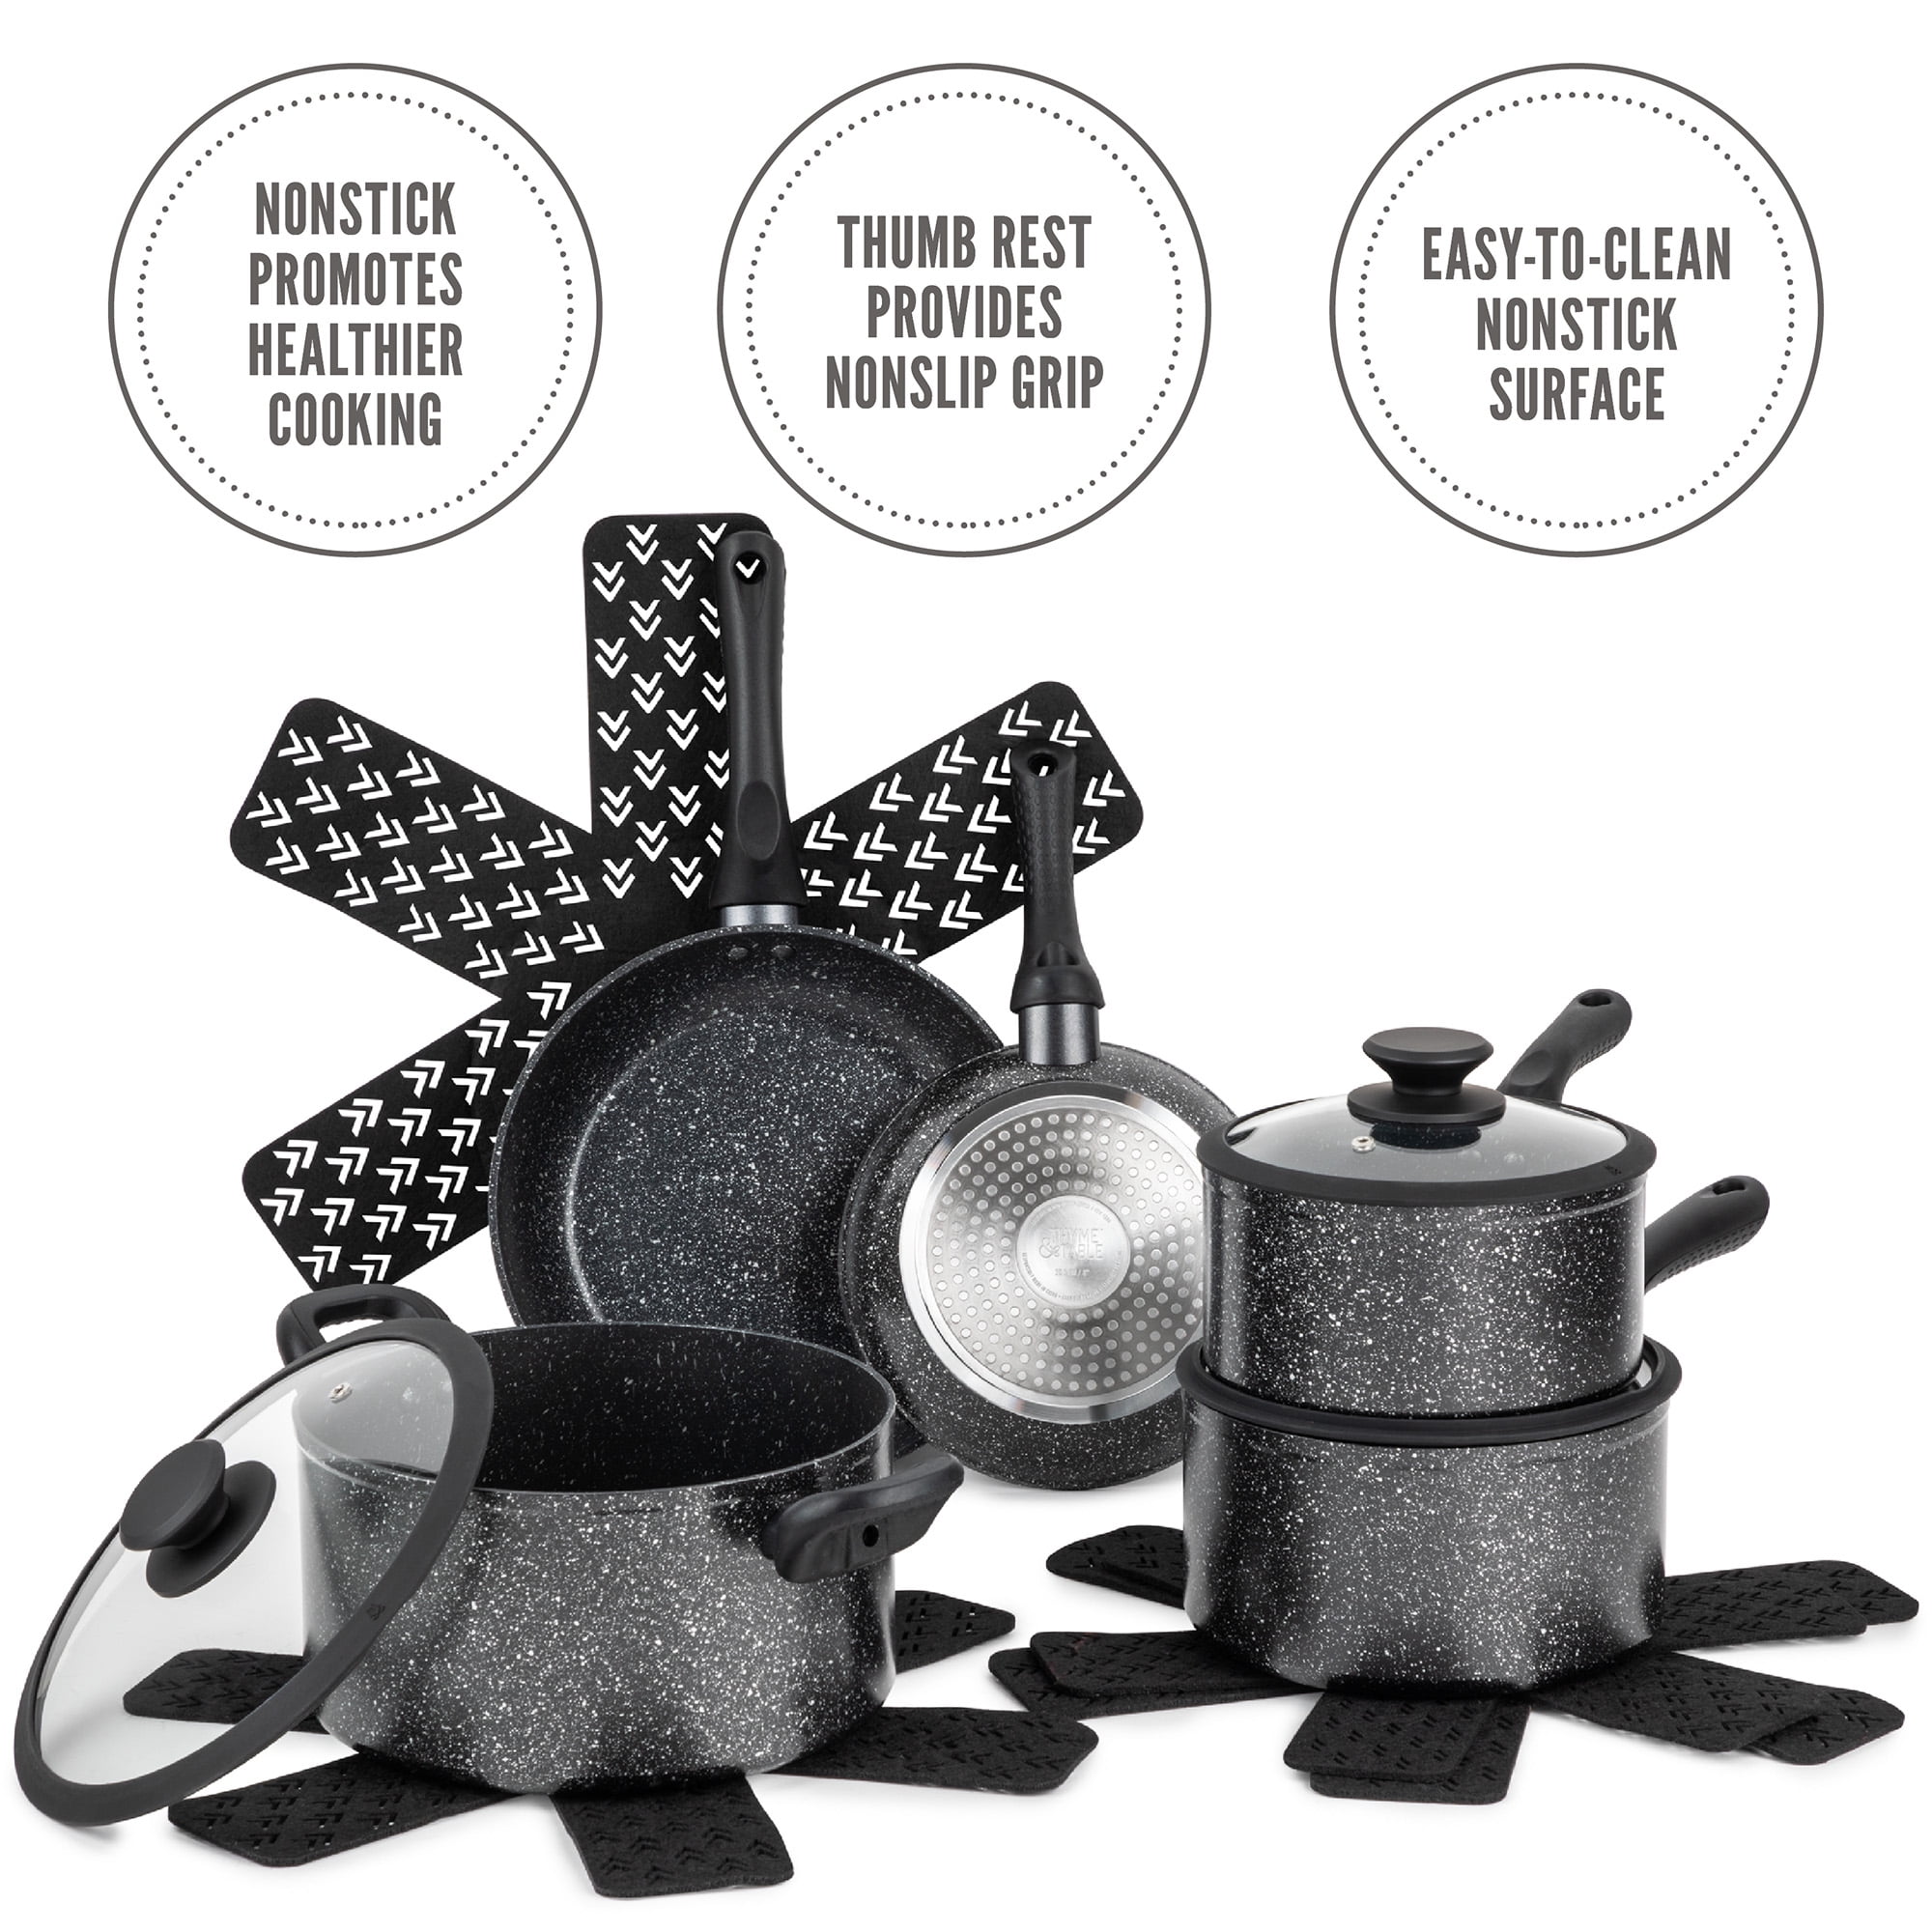 Get a Thyme & Table cookware set for $79 at Walmart for Black Friday